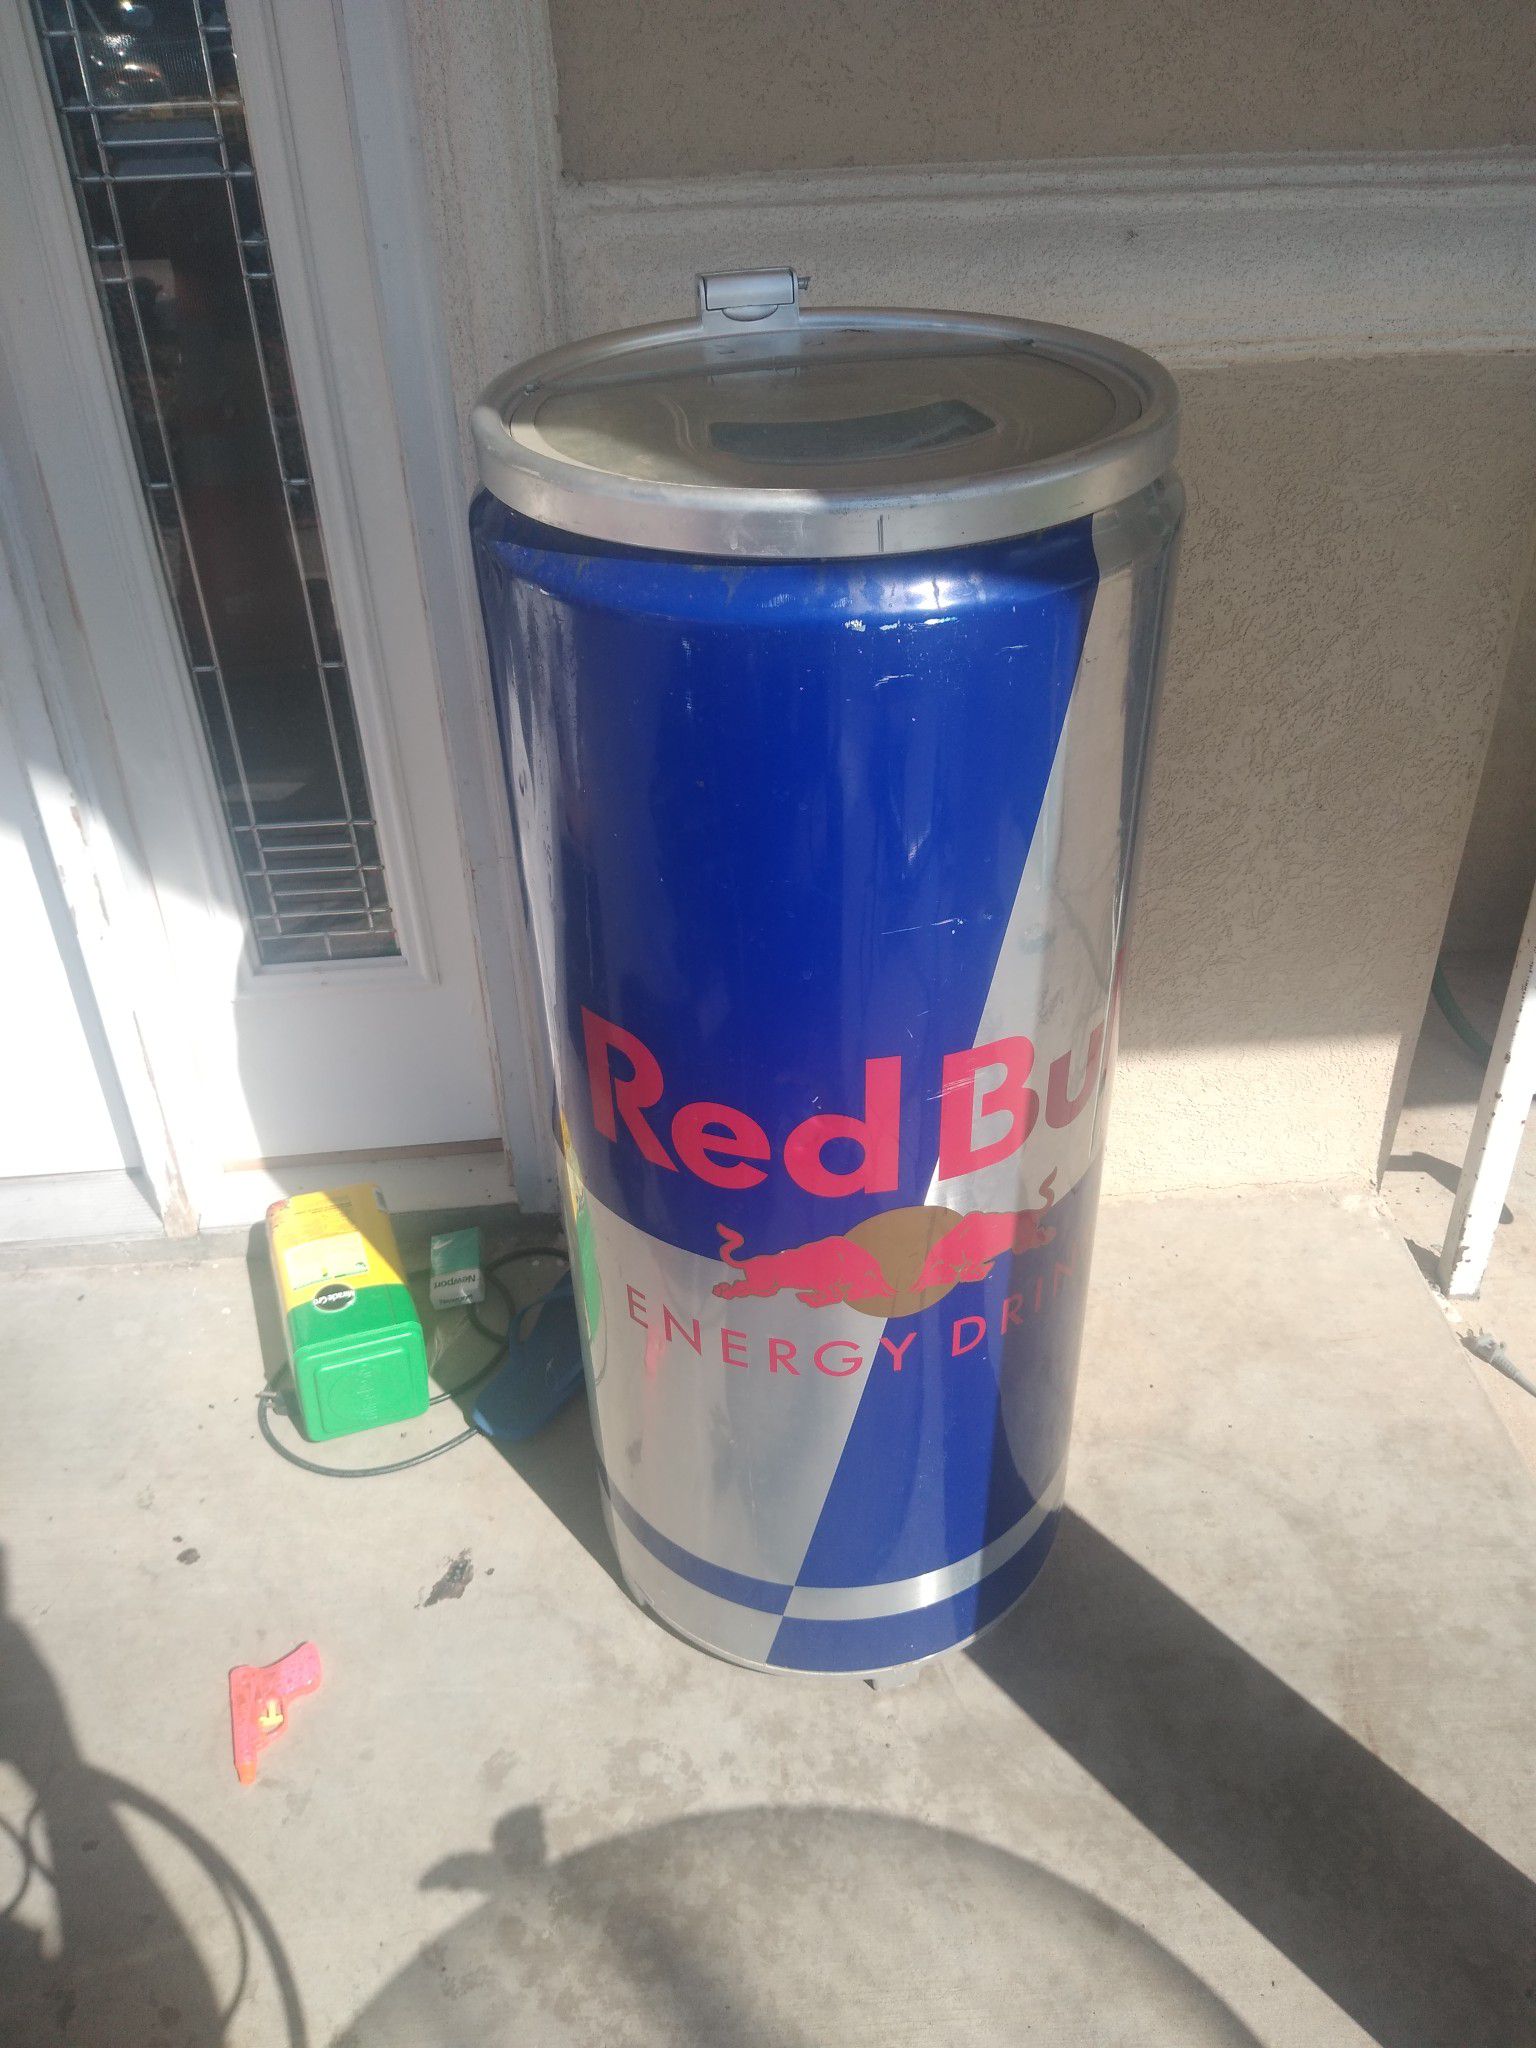 Red bull plug in cooler